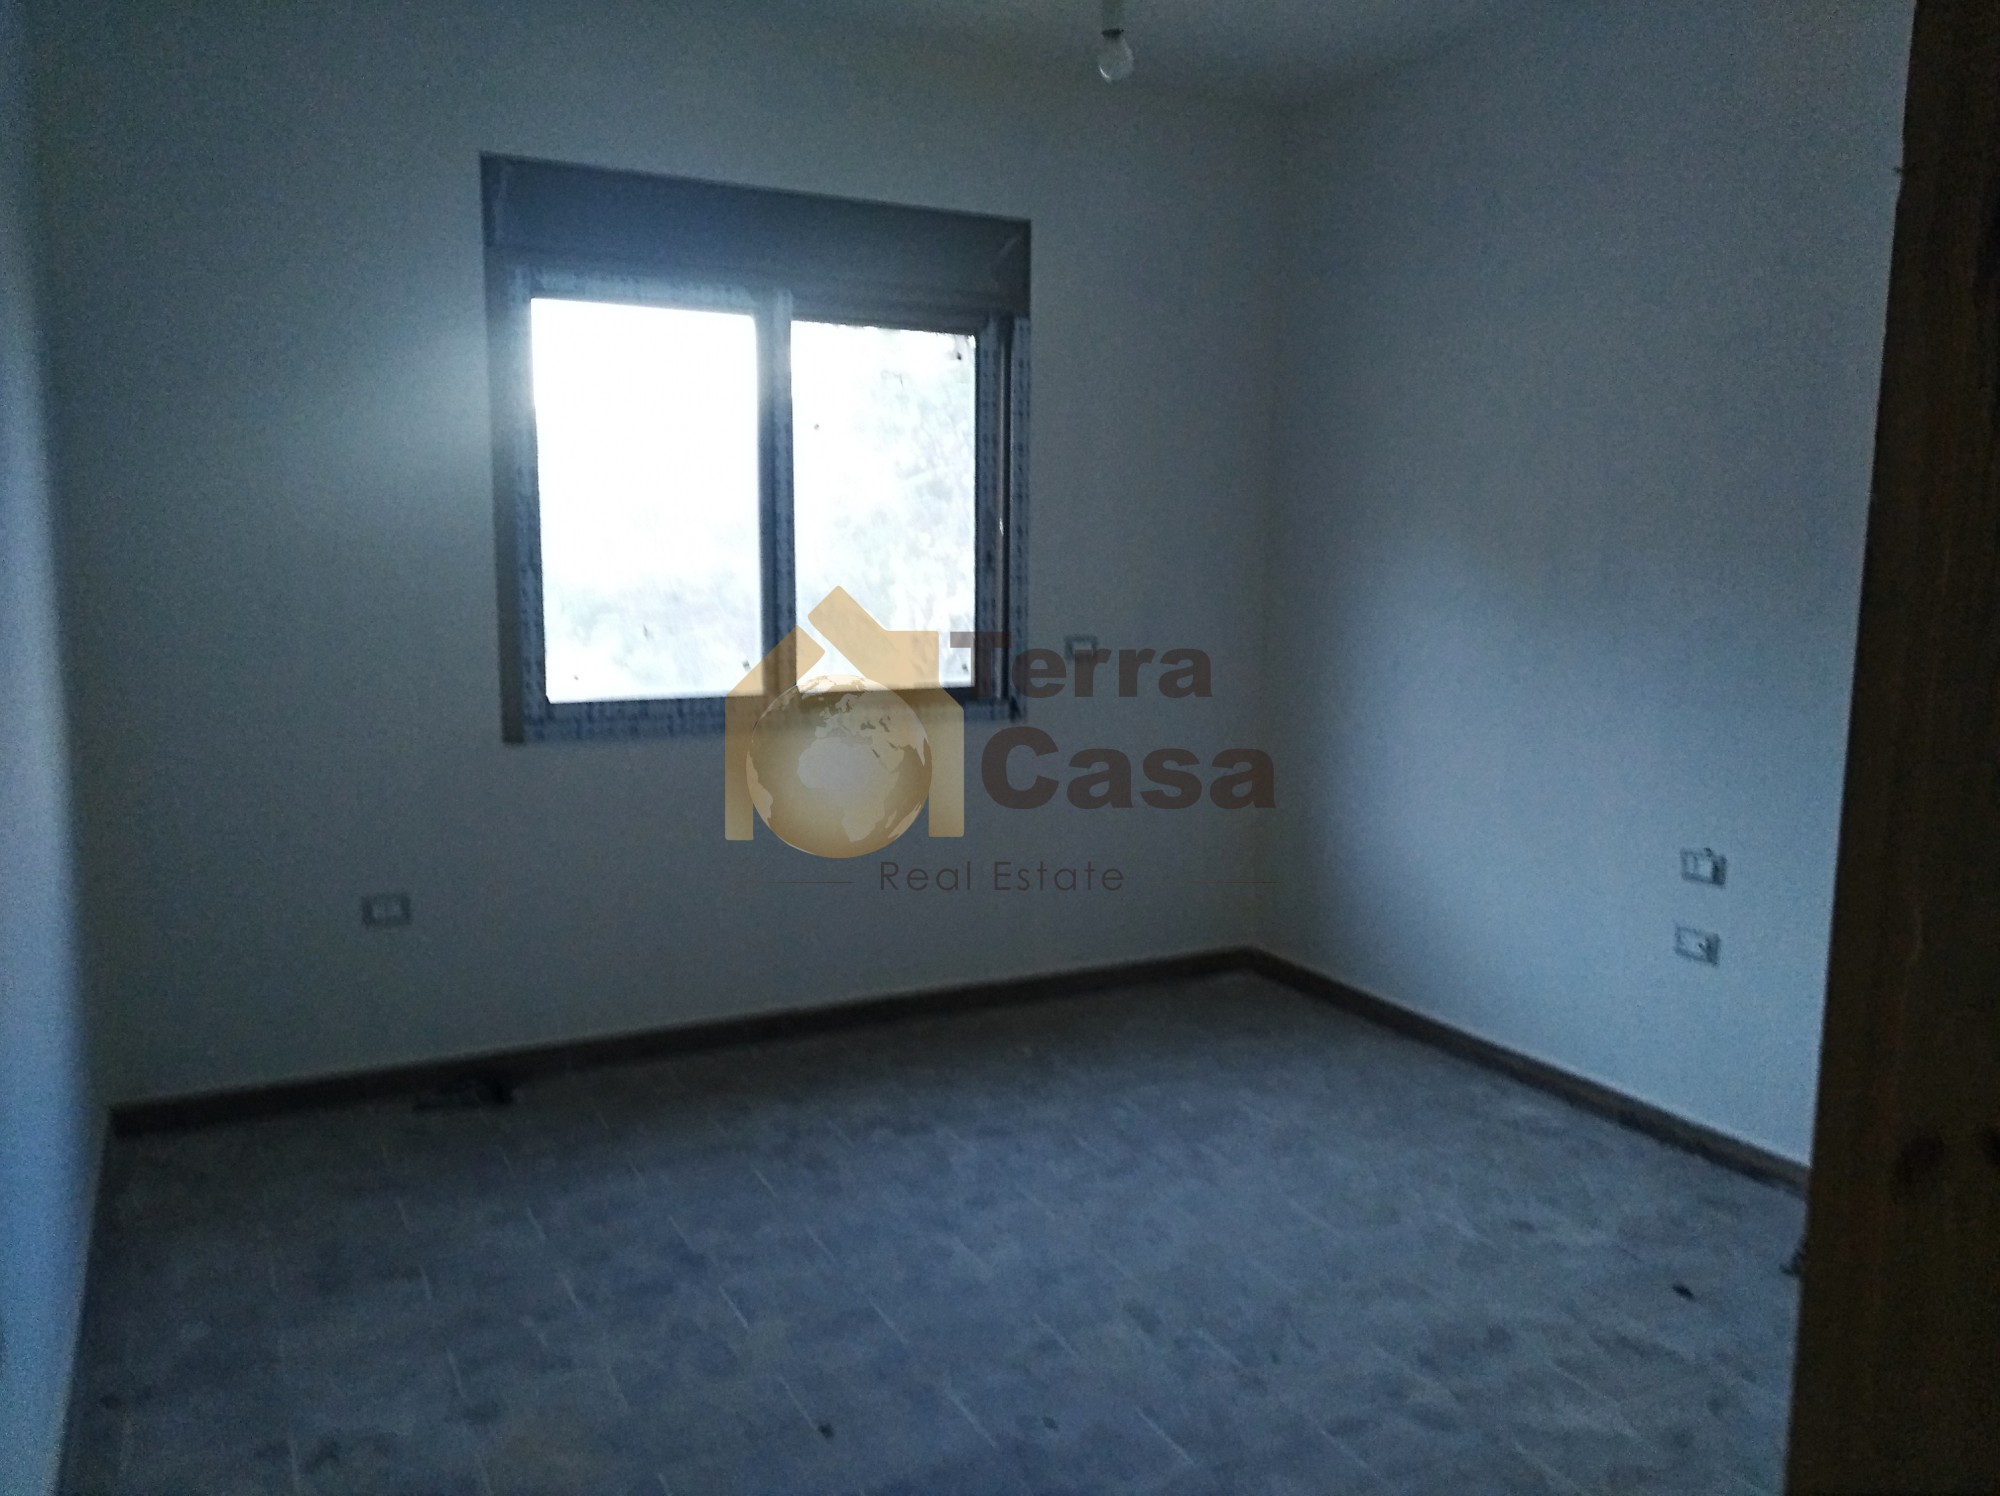 Apartment for sale in zahle brand new with 97 sqm garden .